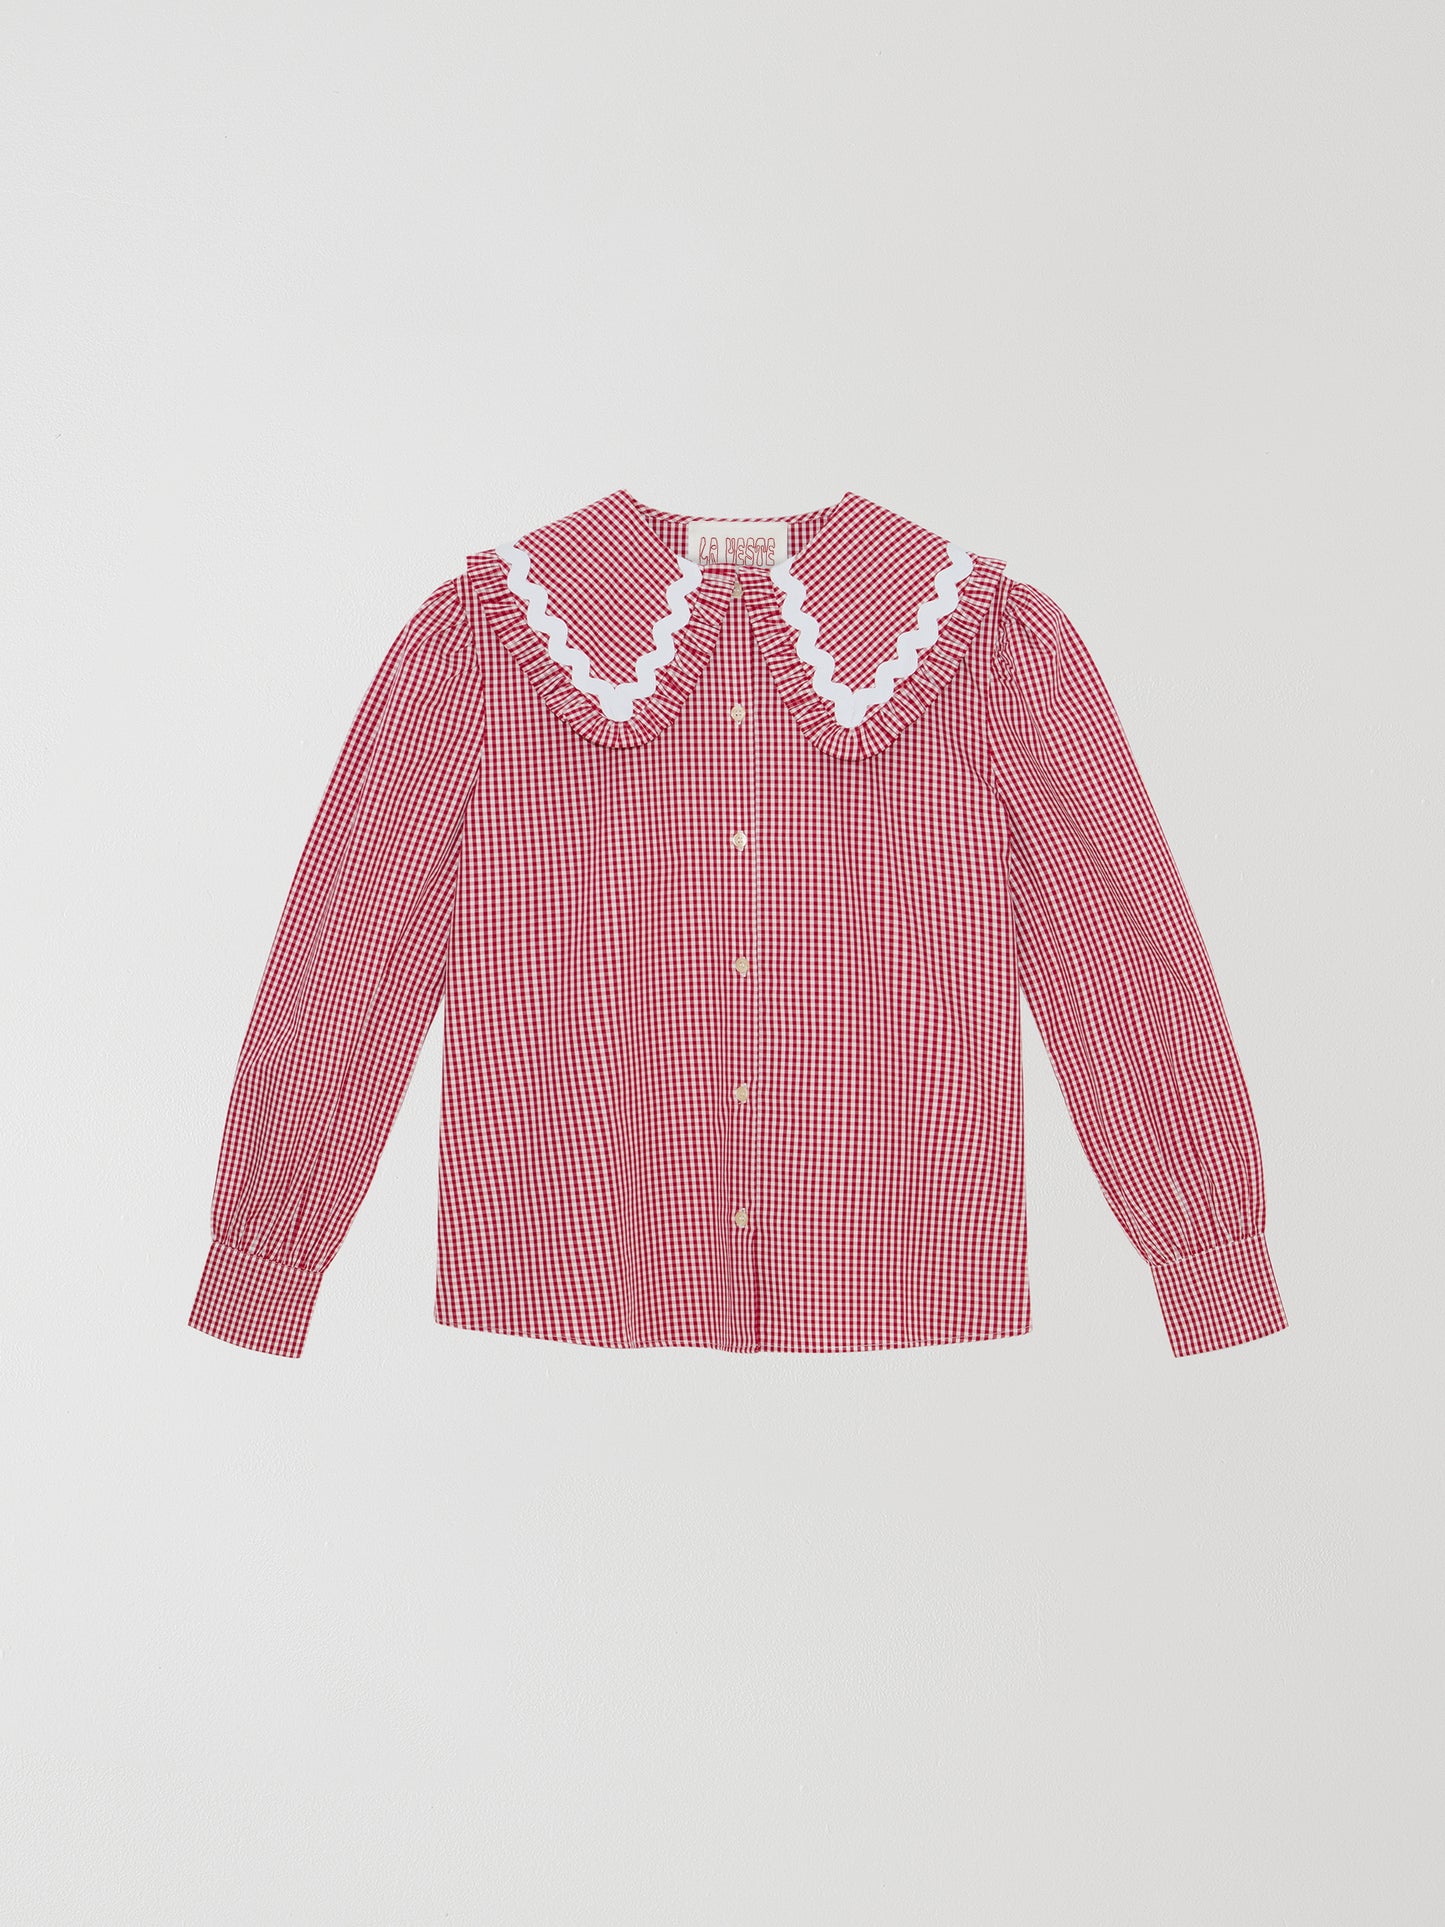 Red and white vichy check shirt made of cotton with white trim detail on the collar